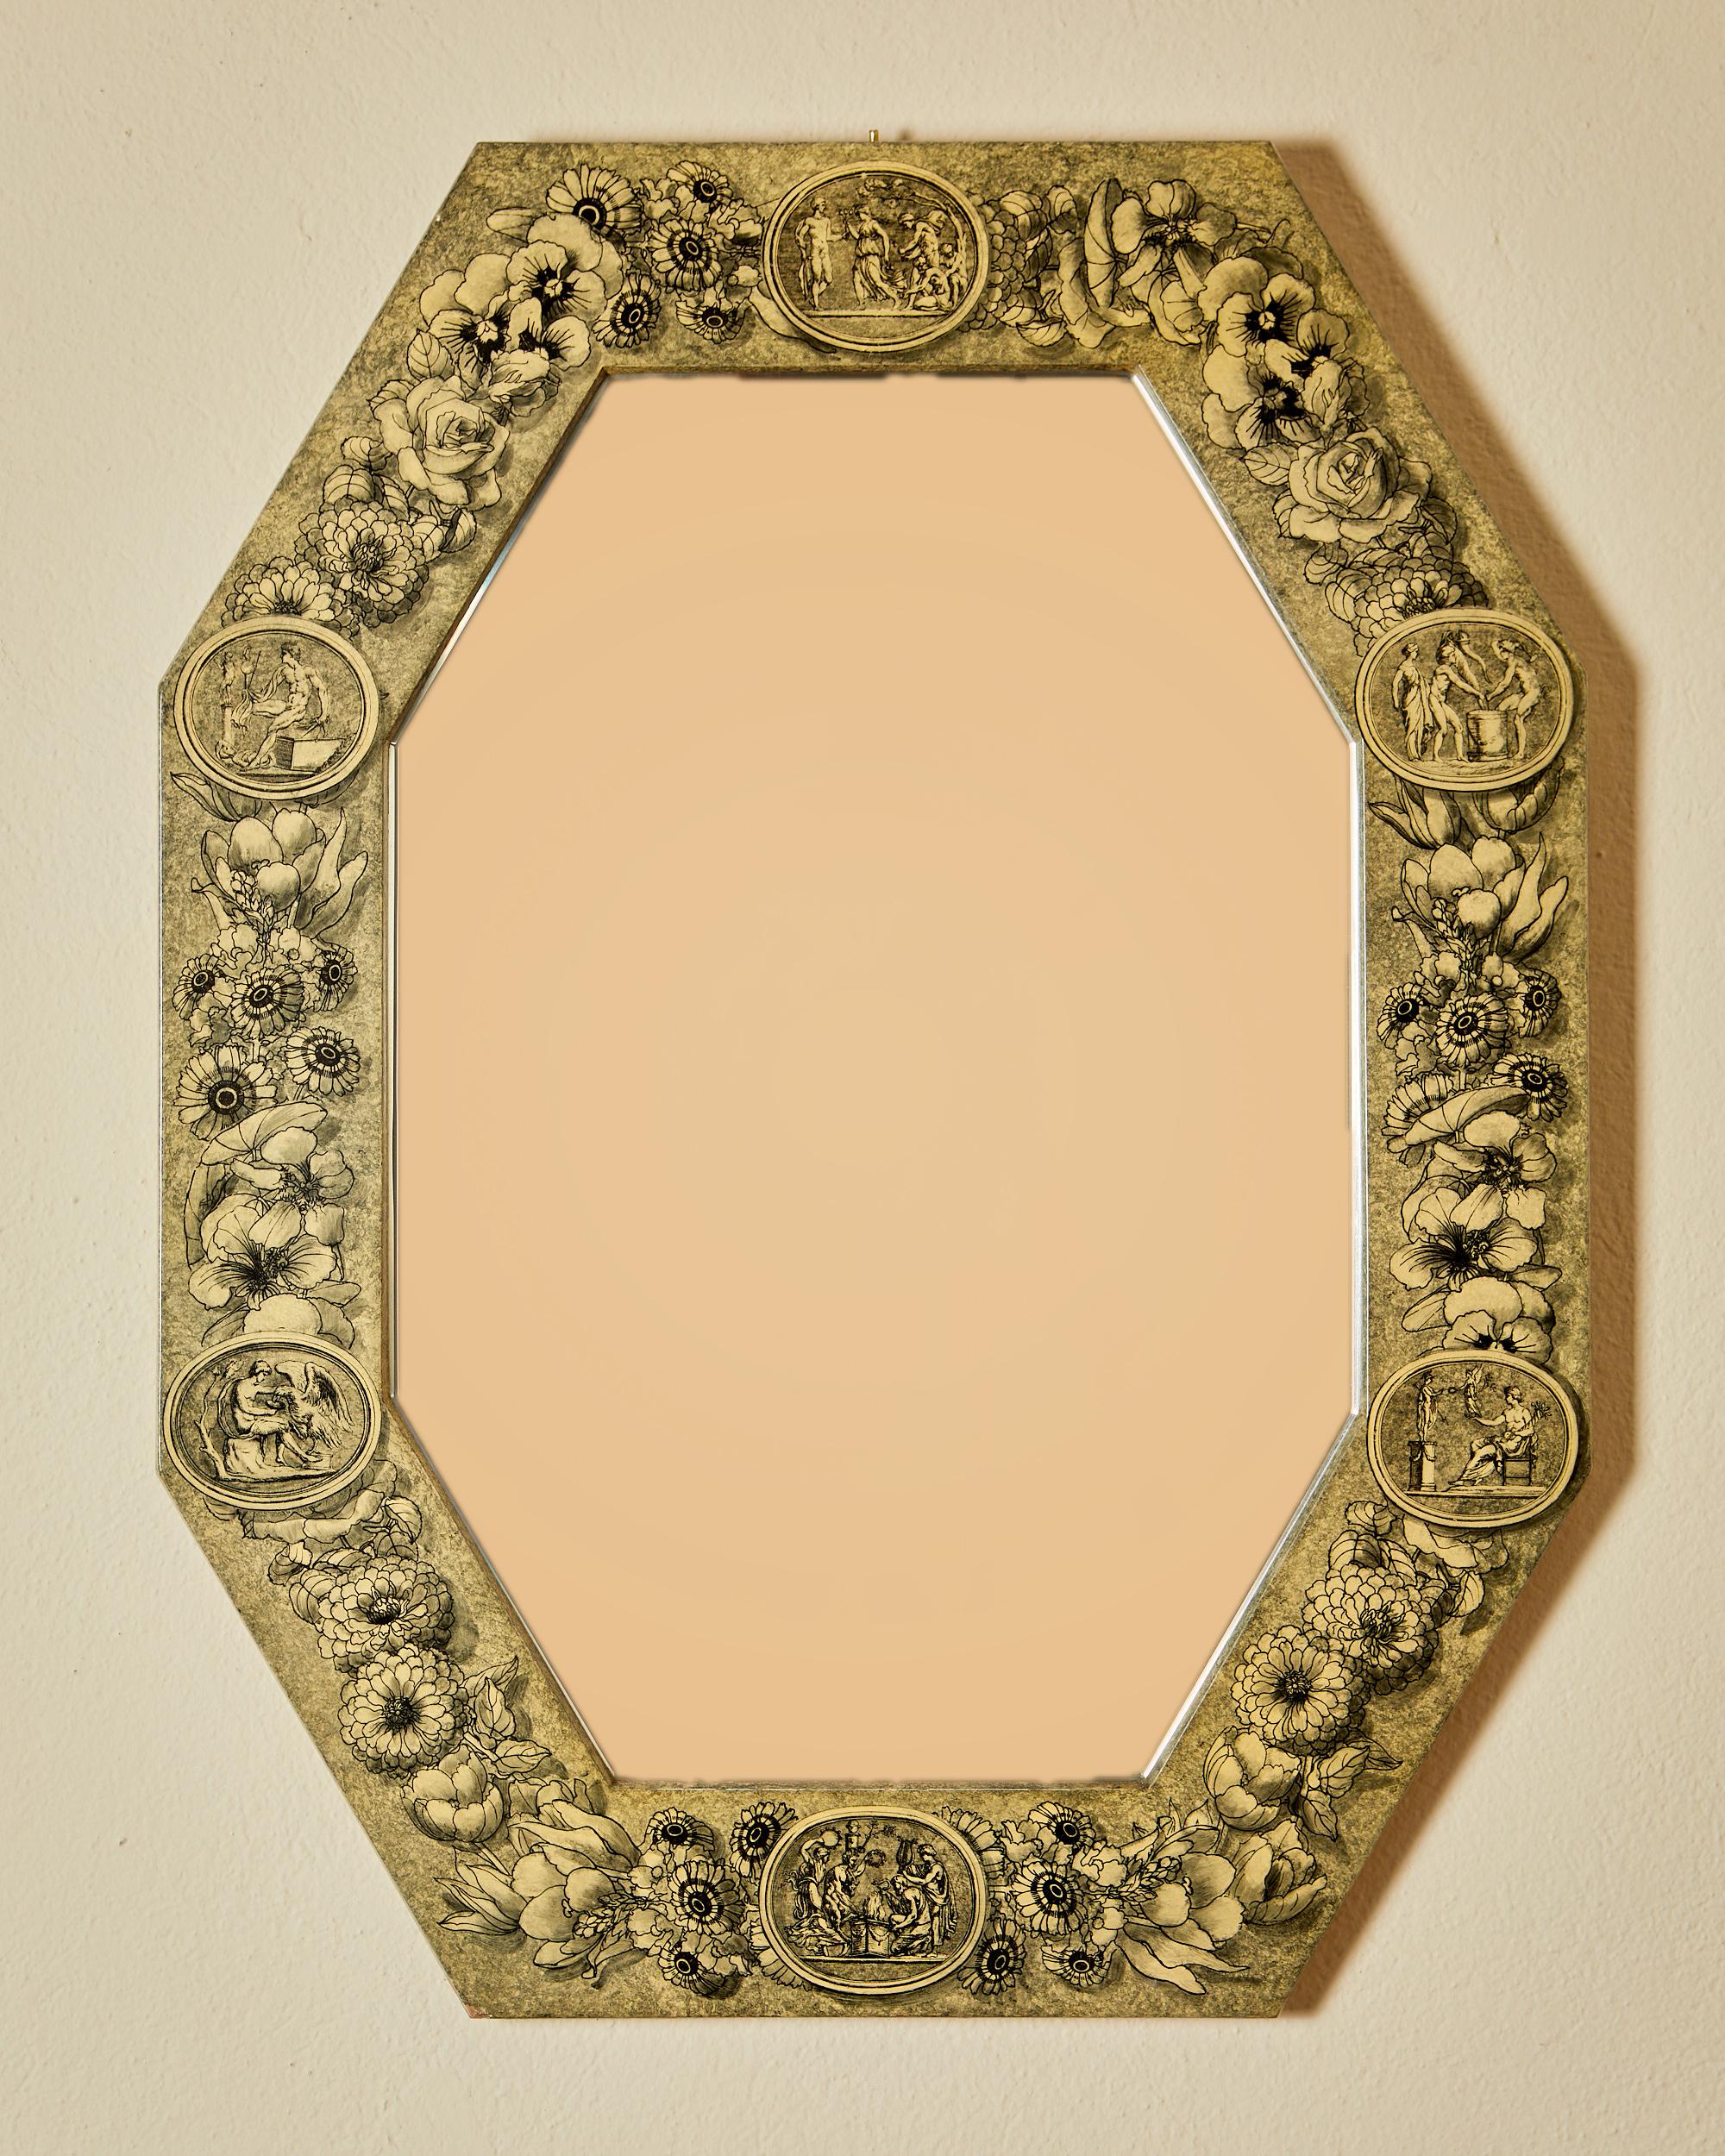 Piero Forna,
wall mirror,
wooden support covered with screen prints with neo-classical decoration of flowers and mythological scenes,
circa 1960, Italy.
Height 85 cm, width 64 cm, depth 3 cm.